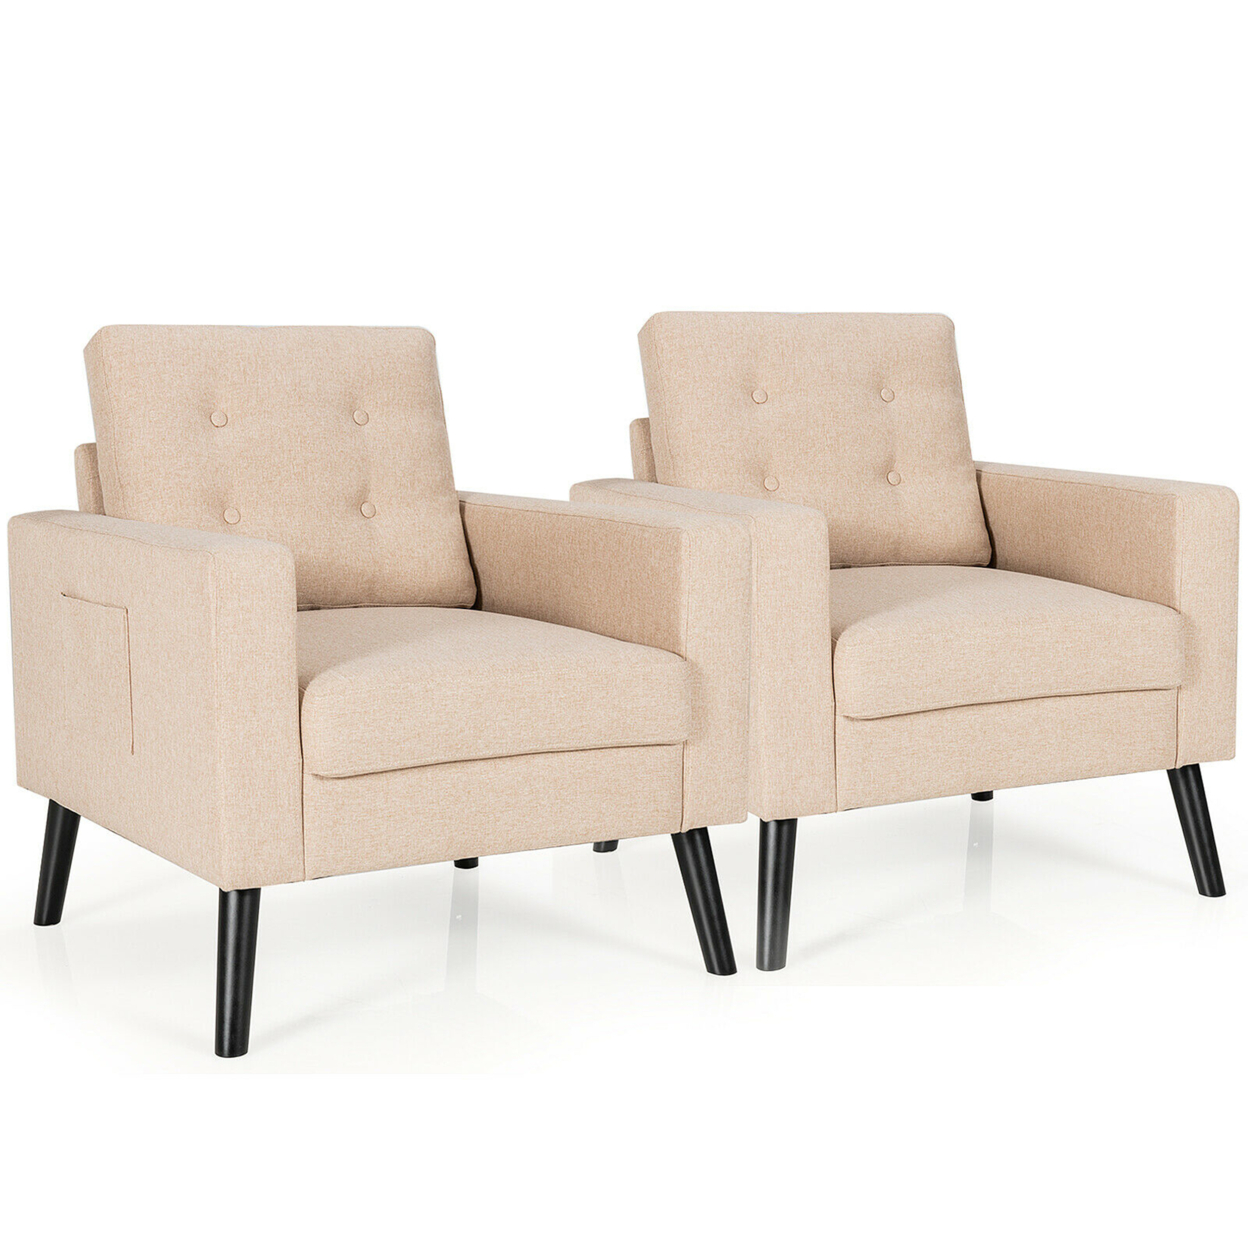 Set Of 2 Upholstered Accent Chair Single Sofa Armchair W/ Wooden Legs - Beige